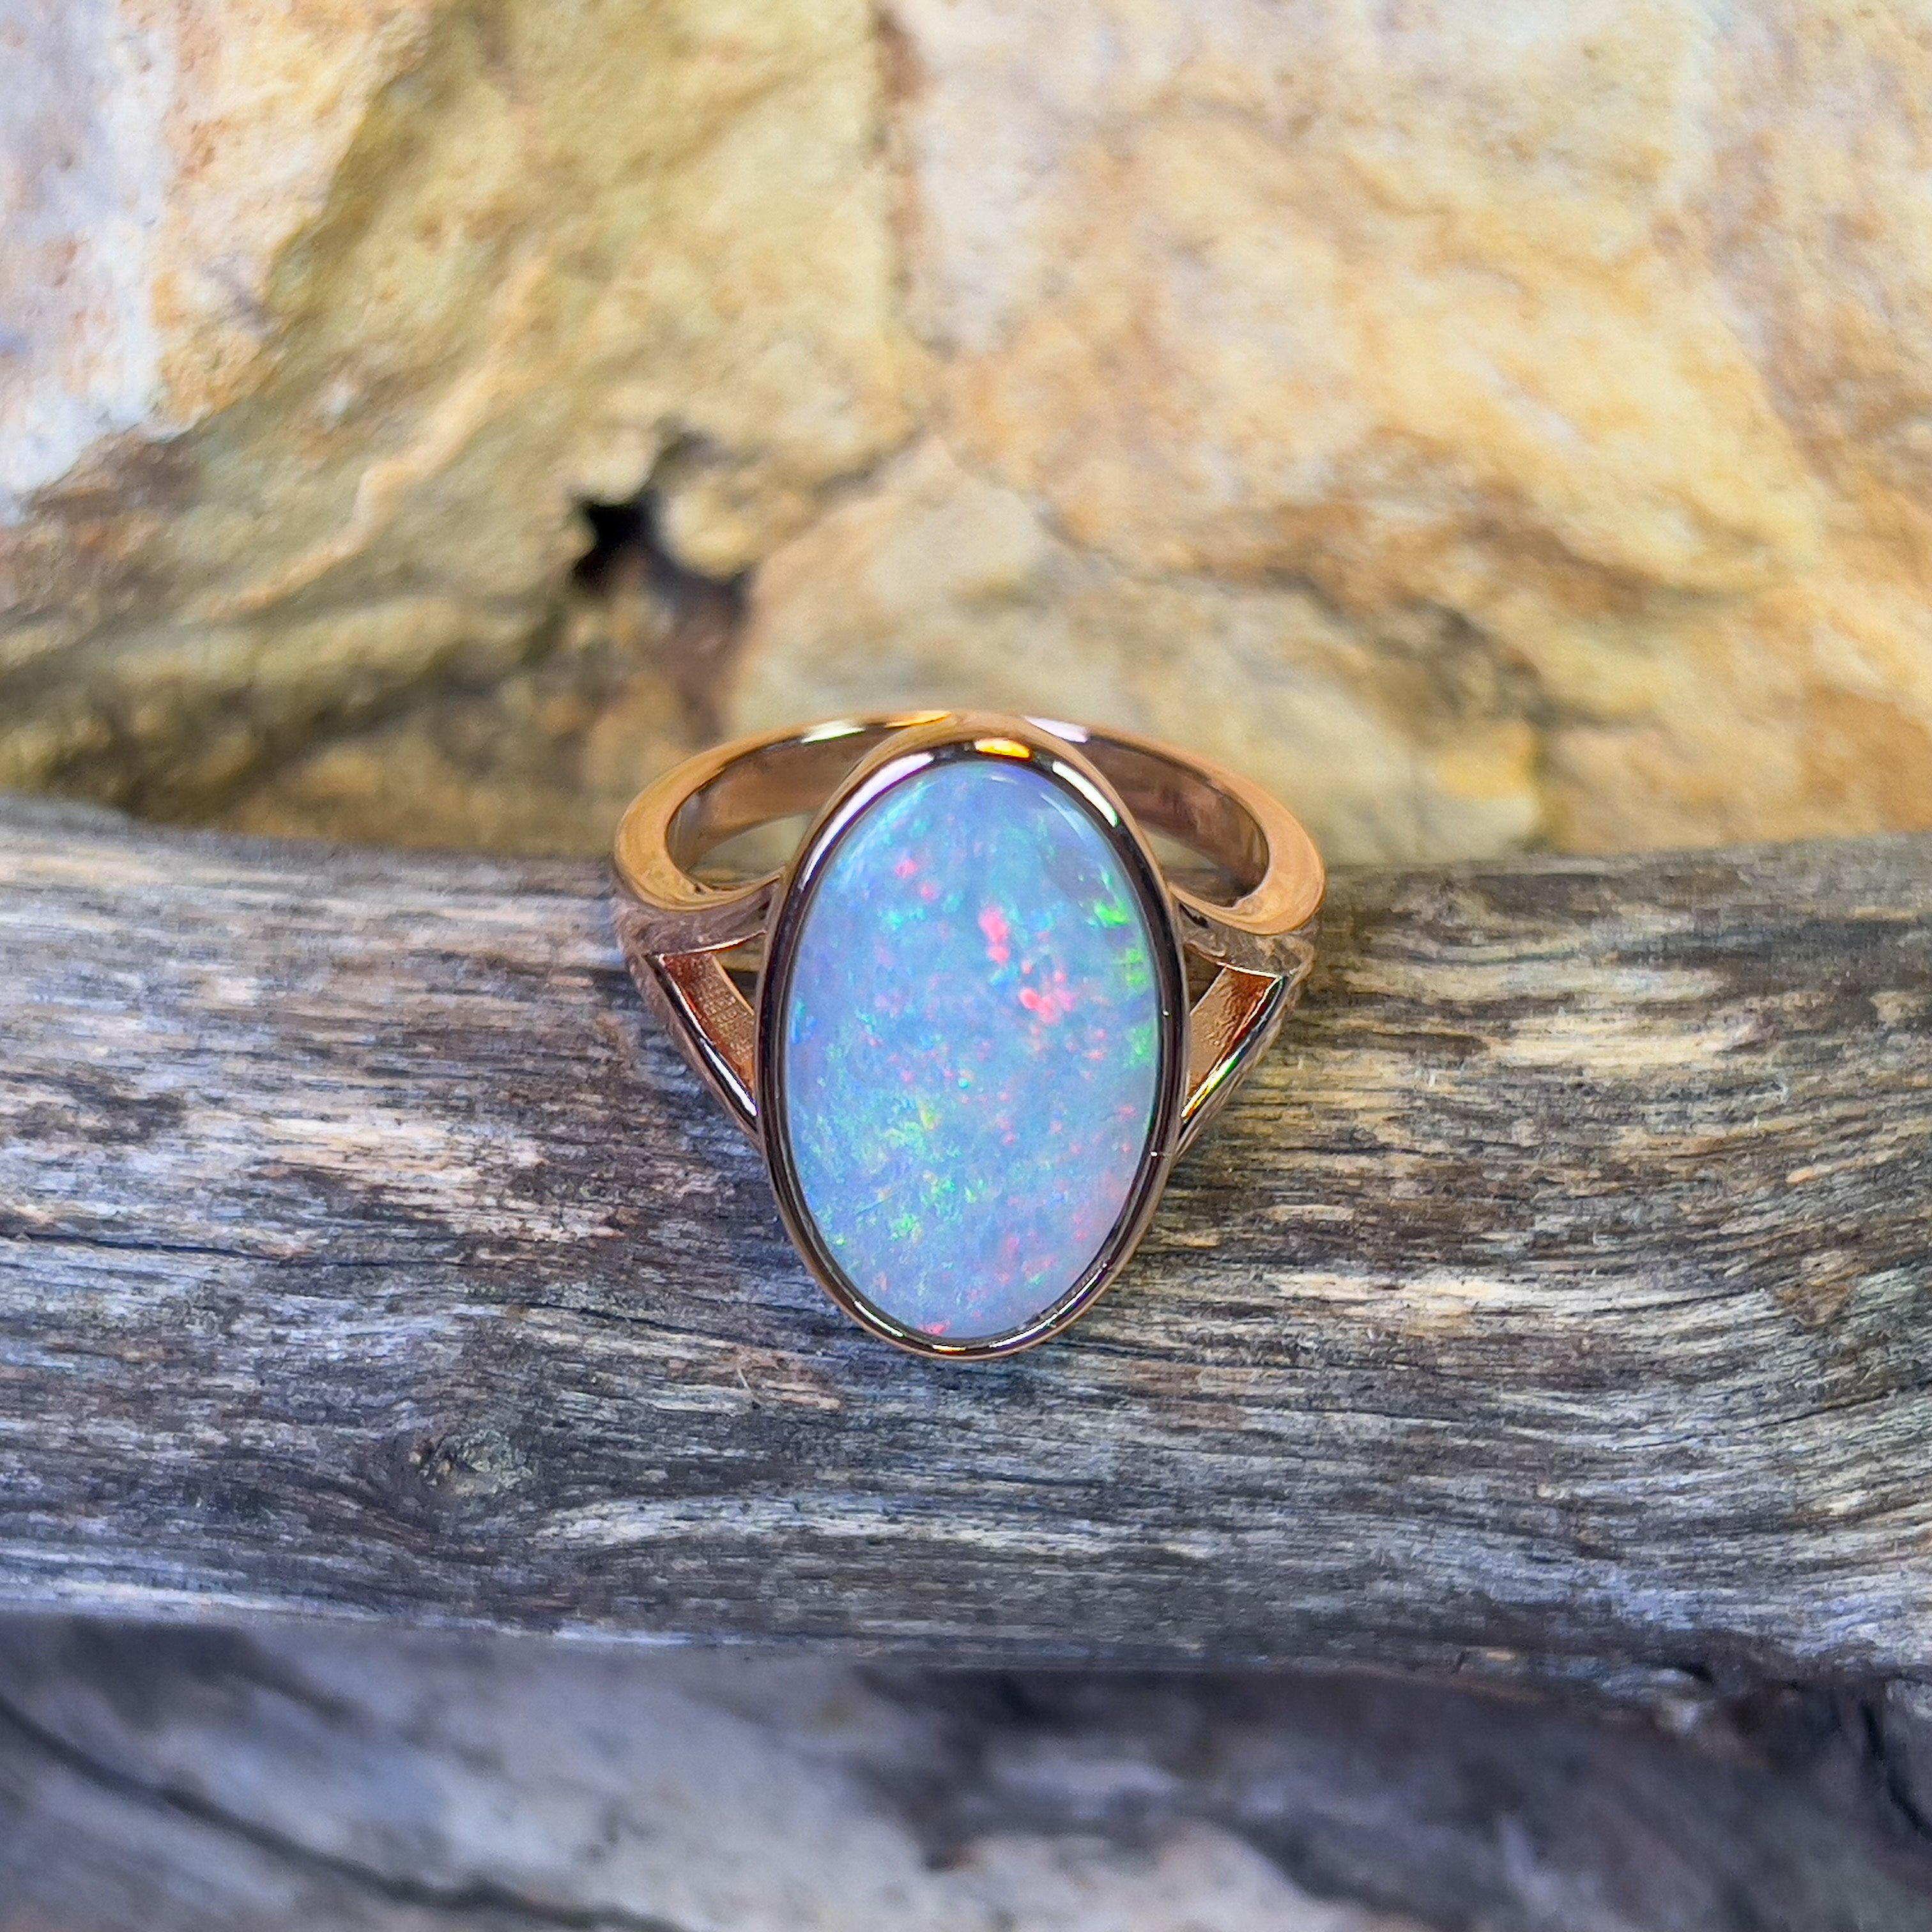 Rose Gold Plated Sterling Silver Solitaire ring with Dark Opal 4.76ct - Masterpiece Jewellery Opal & Gems Sydney Australia | Online Shop